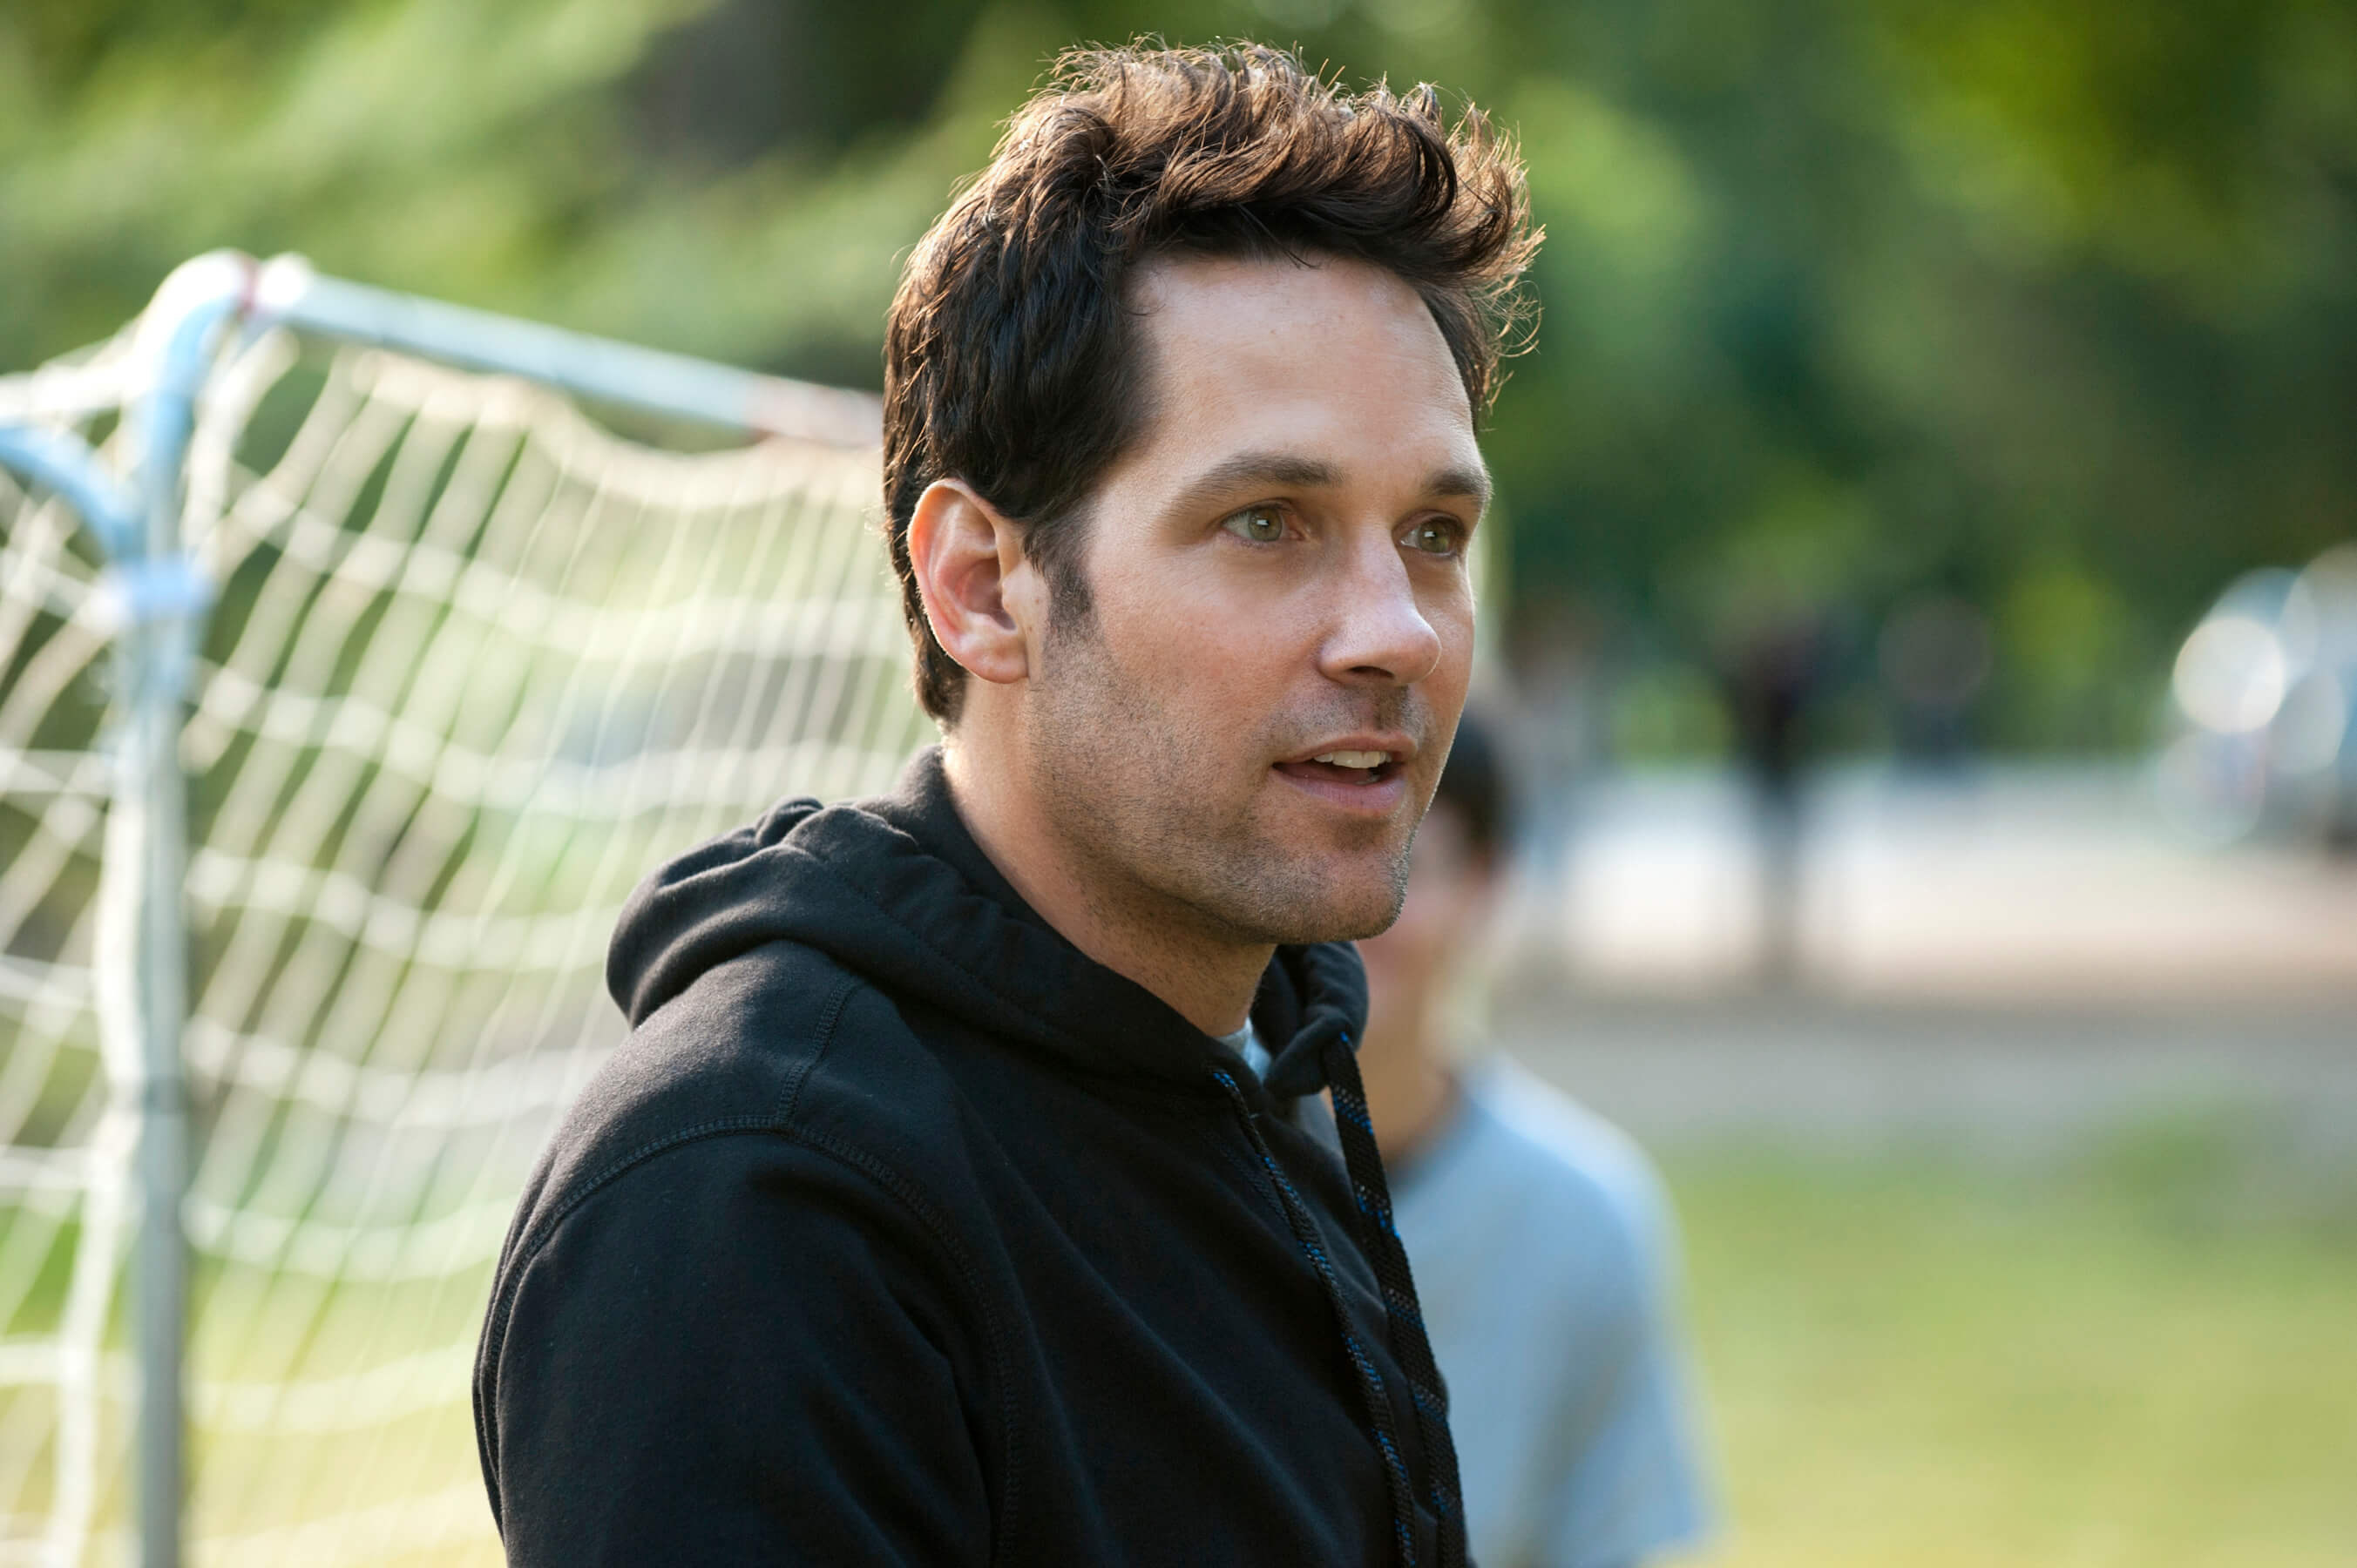 Paul Rudd: Starred as Pete in a 2012 American romantic comedy film, This Is 40. 2710x1800 HD Wallpaper.